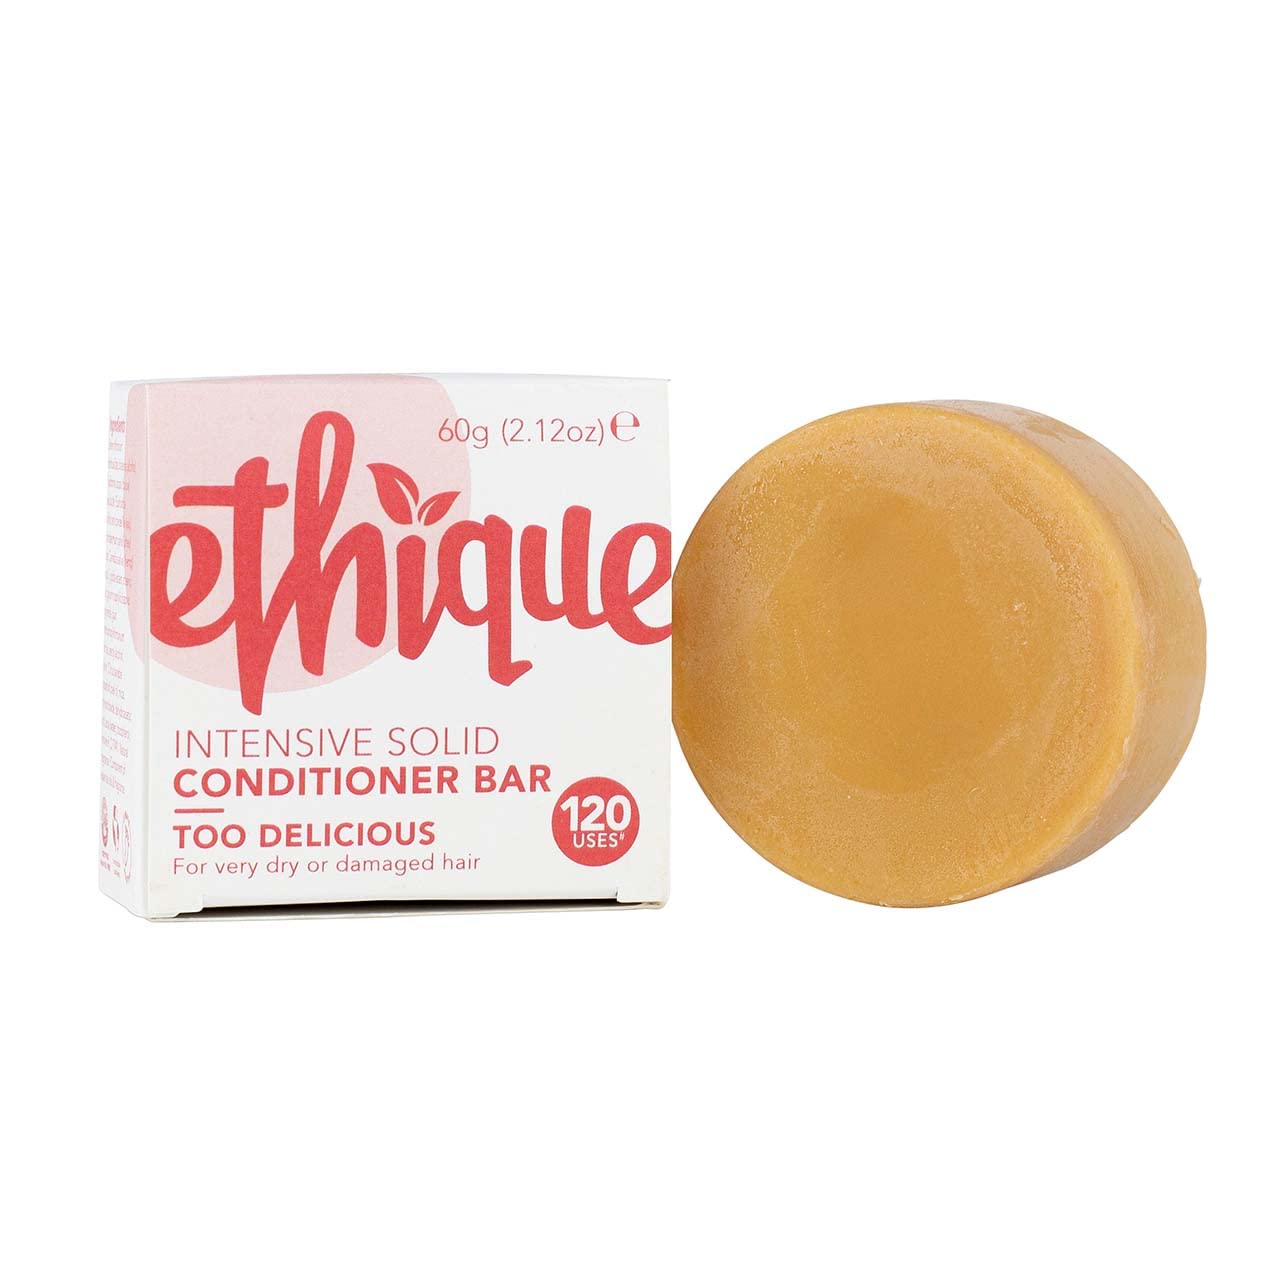 Ethique Too Delicious Intensive Solid Conditioner Bar for Dry to Very Dry Hair - Sulfate-Free, Plastic-Free, Vegan, Cruelty-Free, Eco-Friendly, 2.12 oz (Pack of 1)